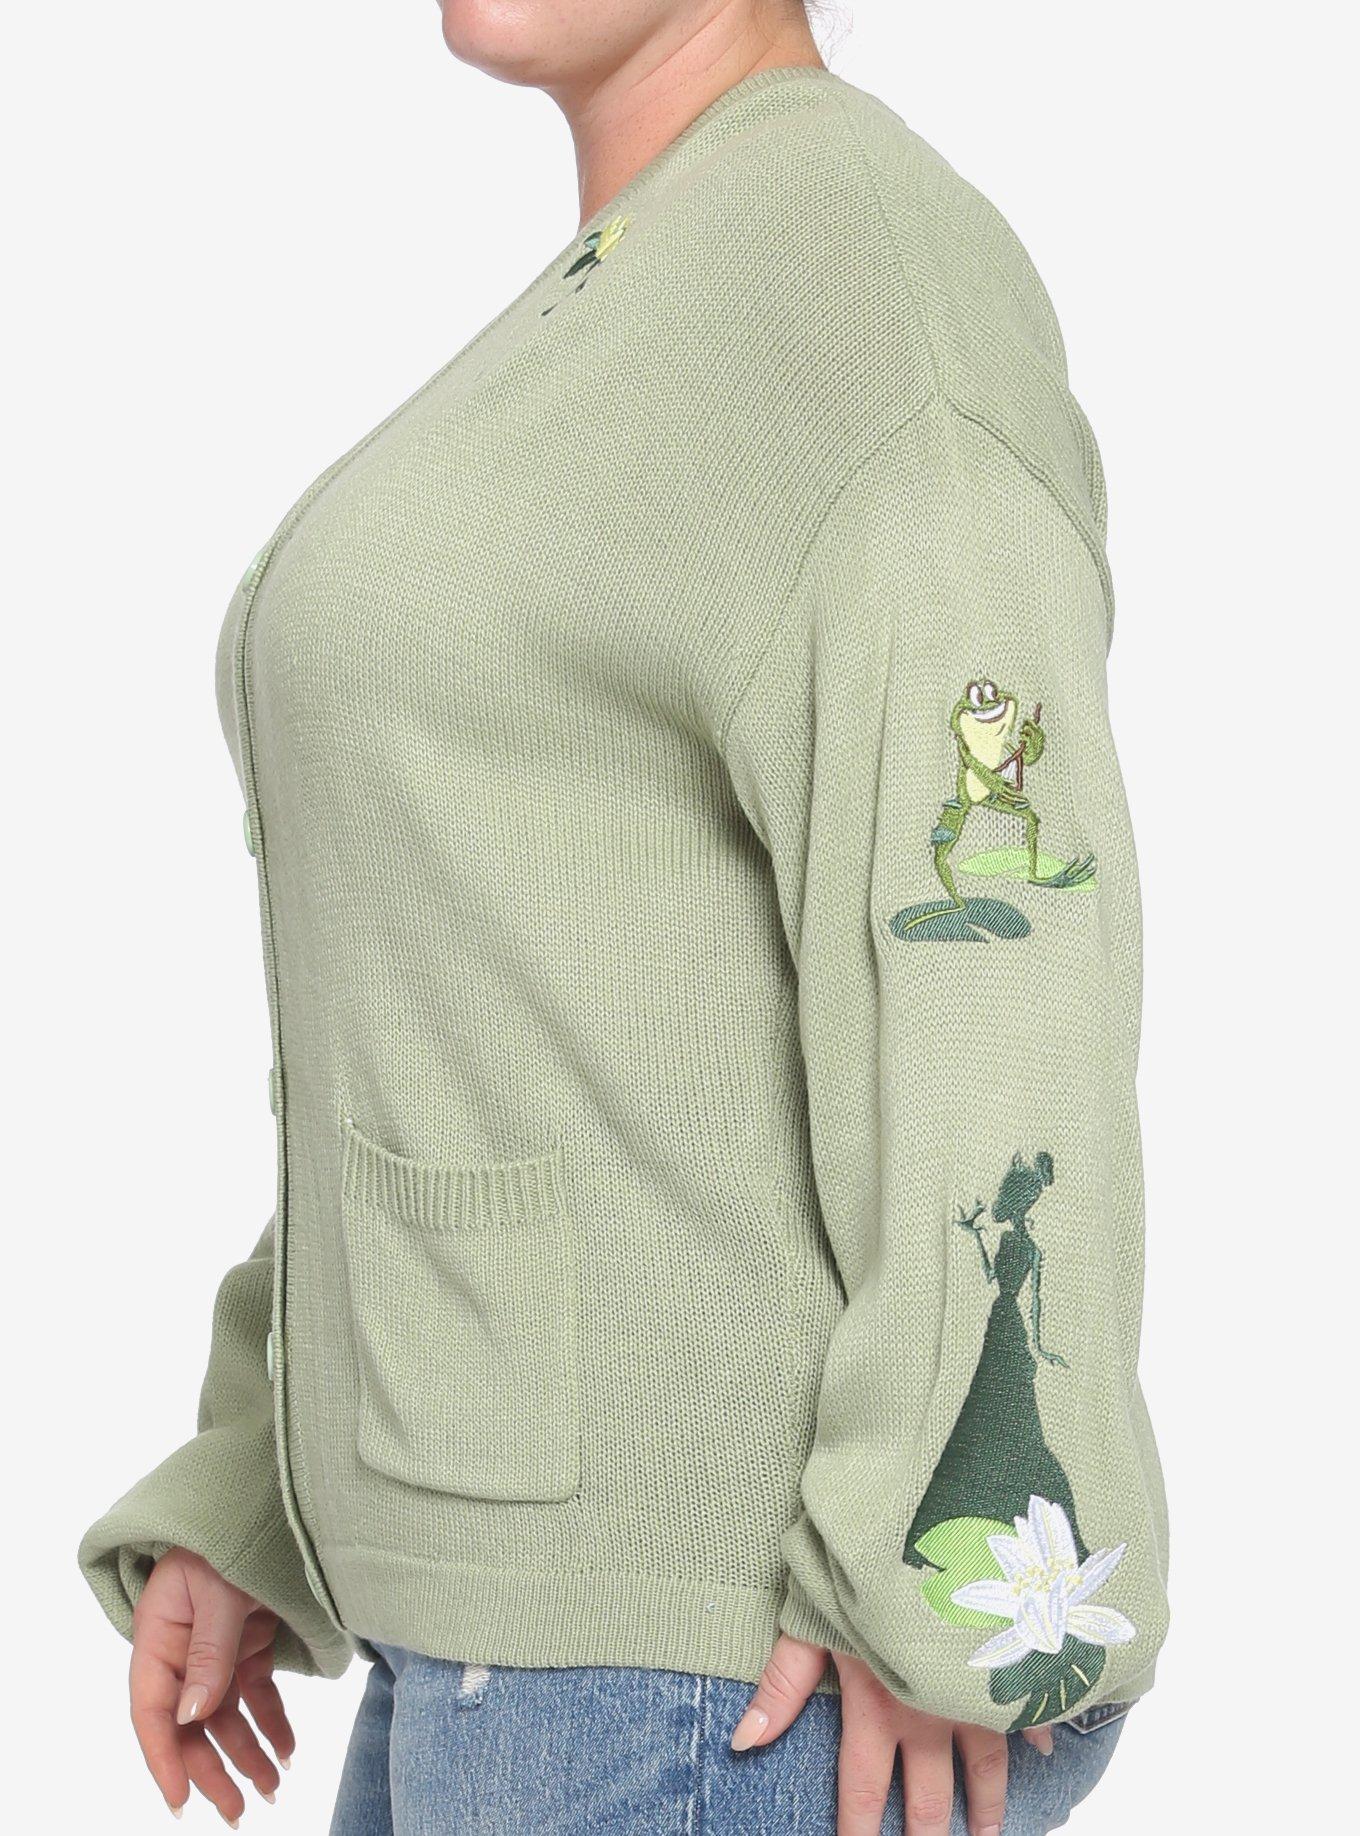 Disney The Princess And The Frog Chunky Knit Skimmer Girls Cardigan Plus Size, MULTI, alternate